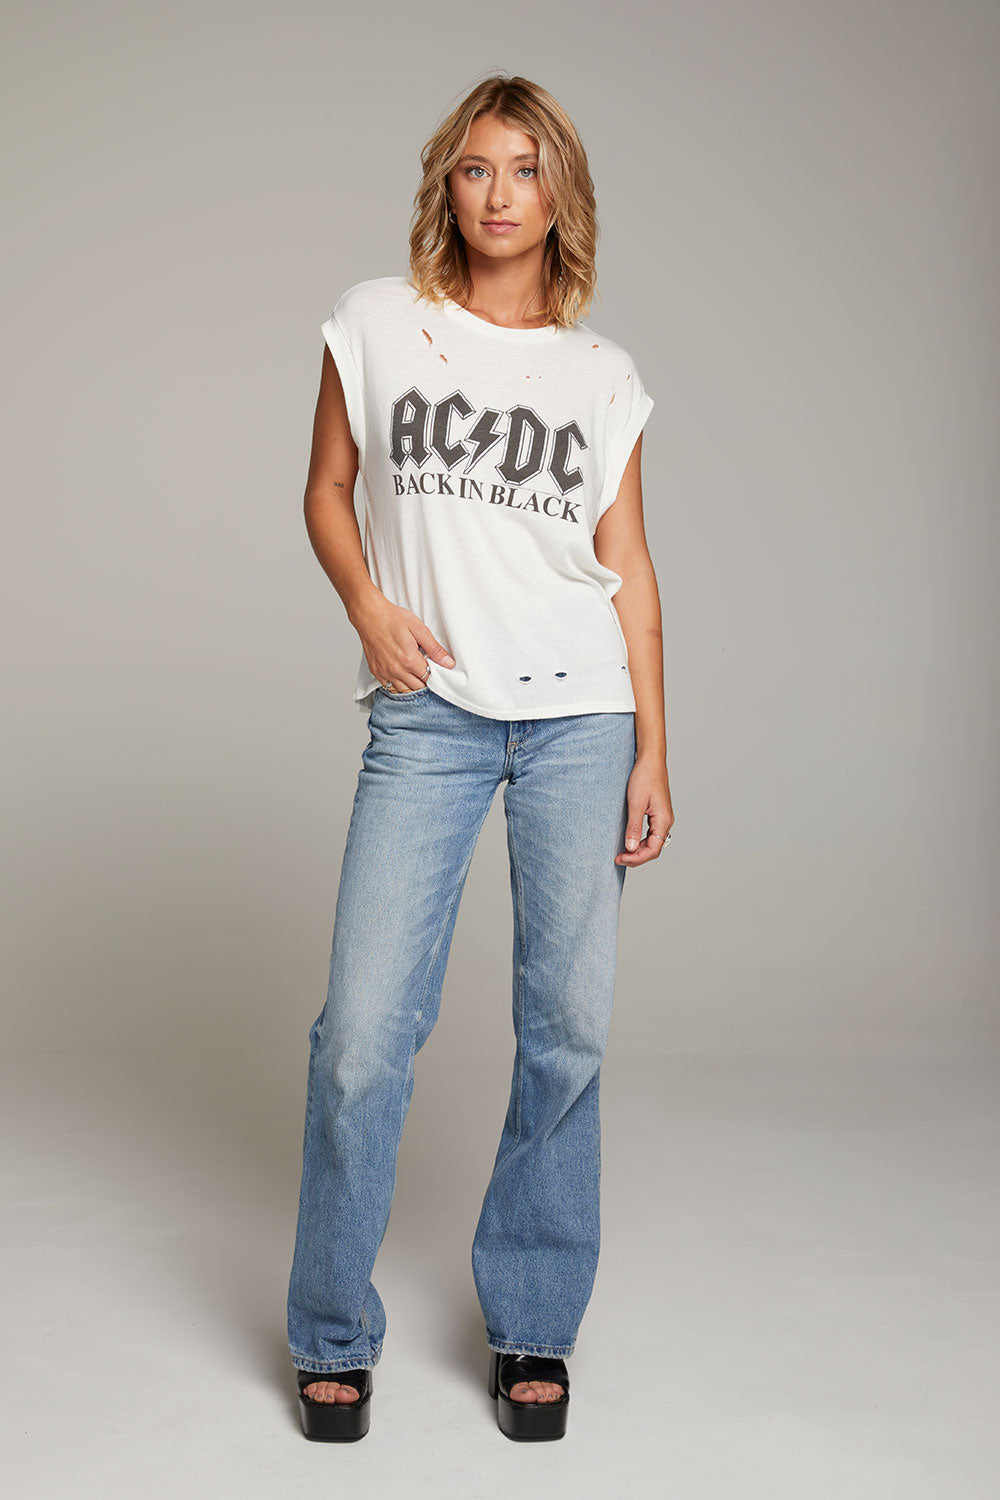 AC/DC Back in Black Distressed Tee WOMENS chaserbrand